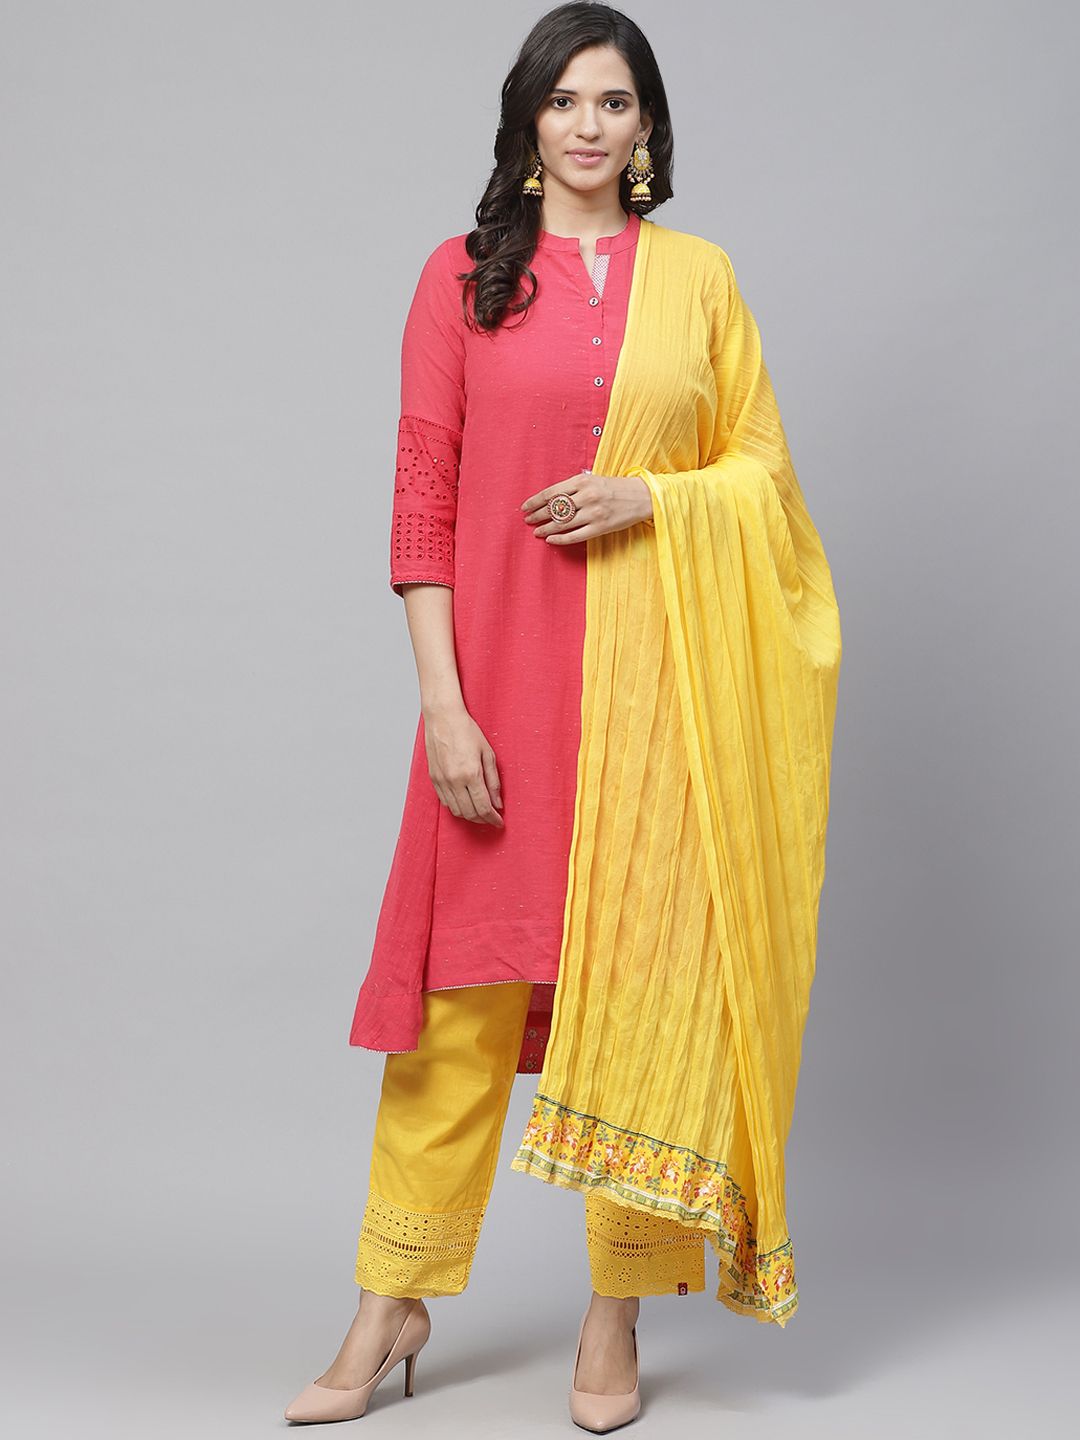 Biba Yellow Solid Crinkled Pure Cotton Dupatta Price in India